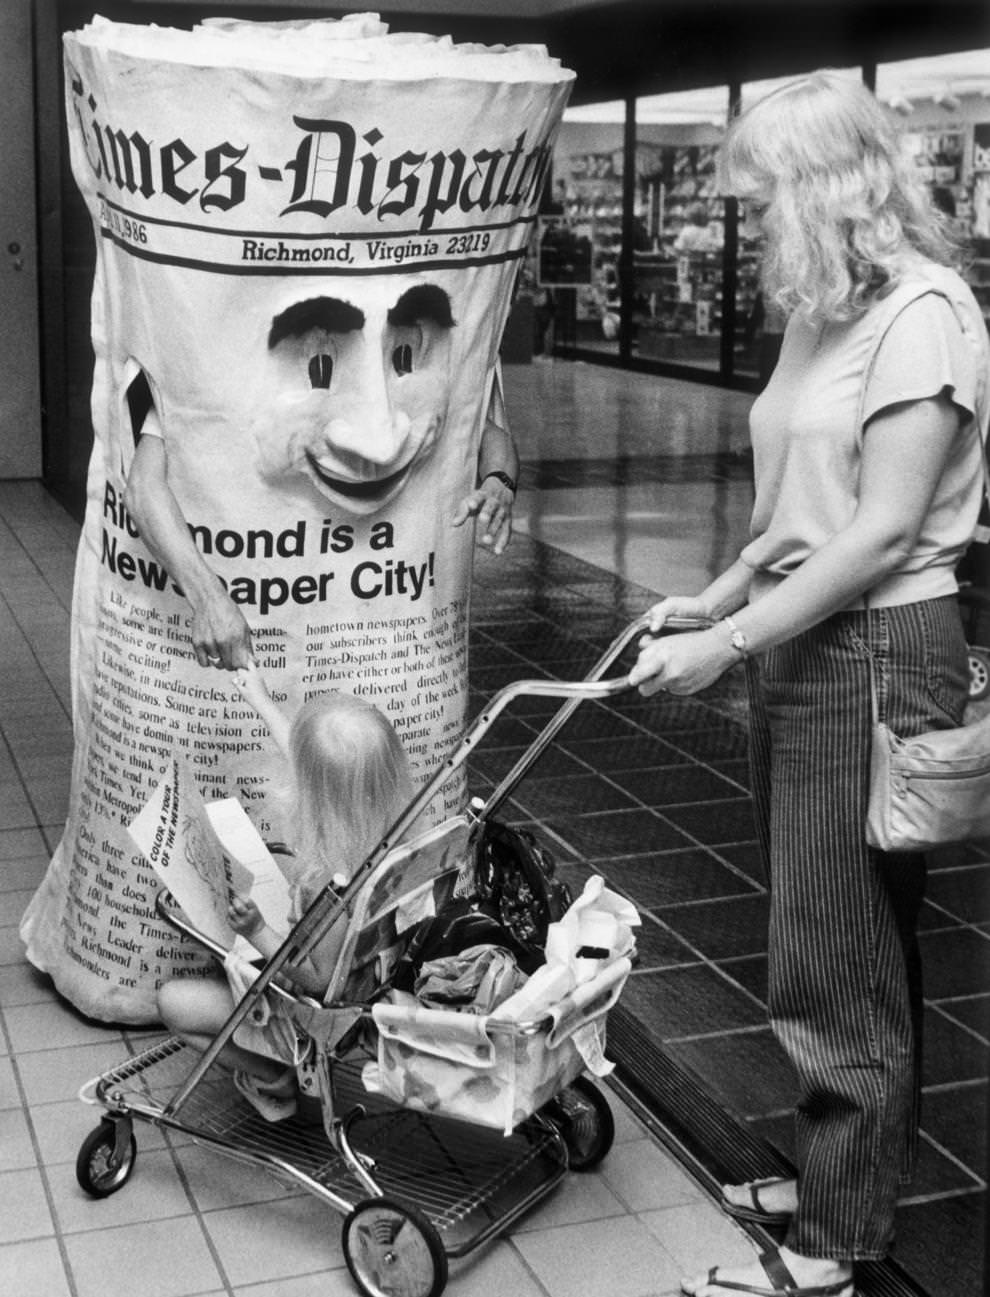 “Mr. Newspaper” greeting a young girl and her mother at a Richmond-area mall, 1986.